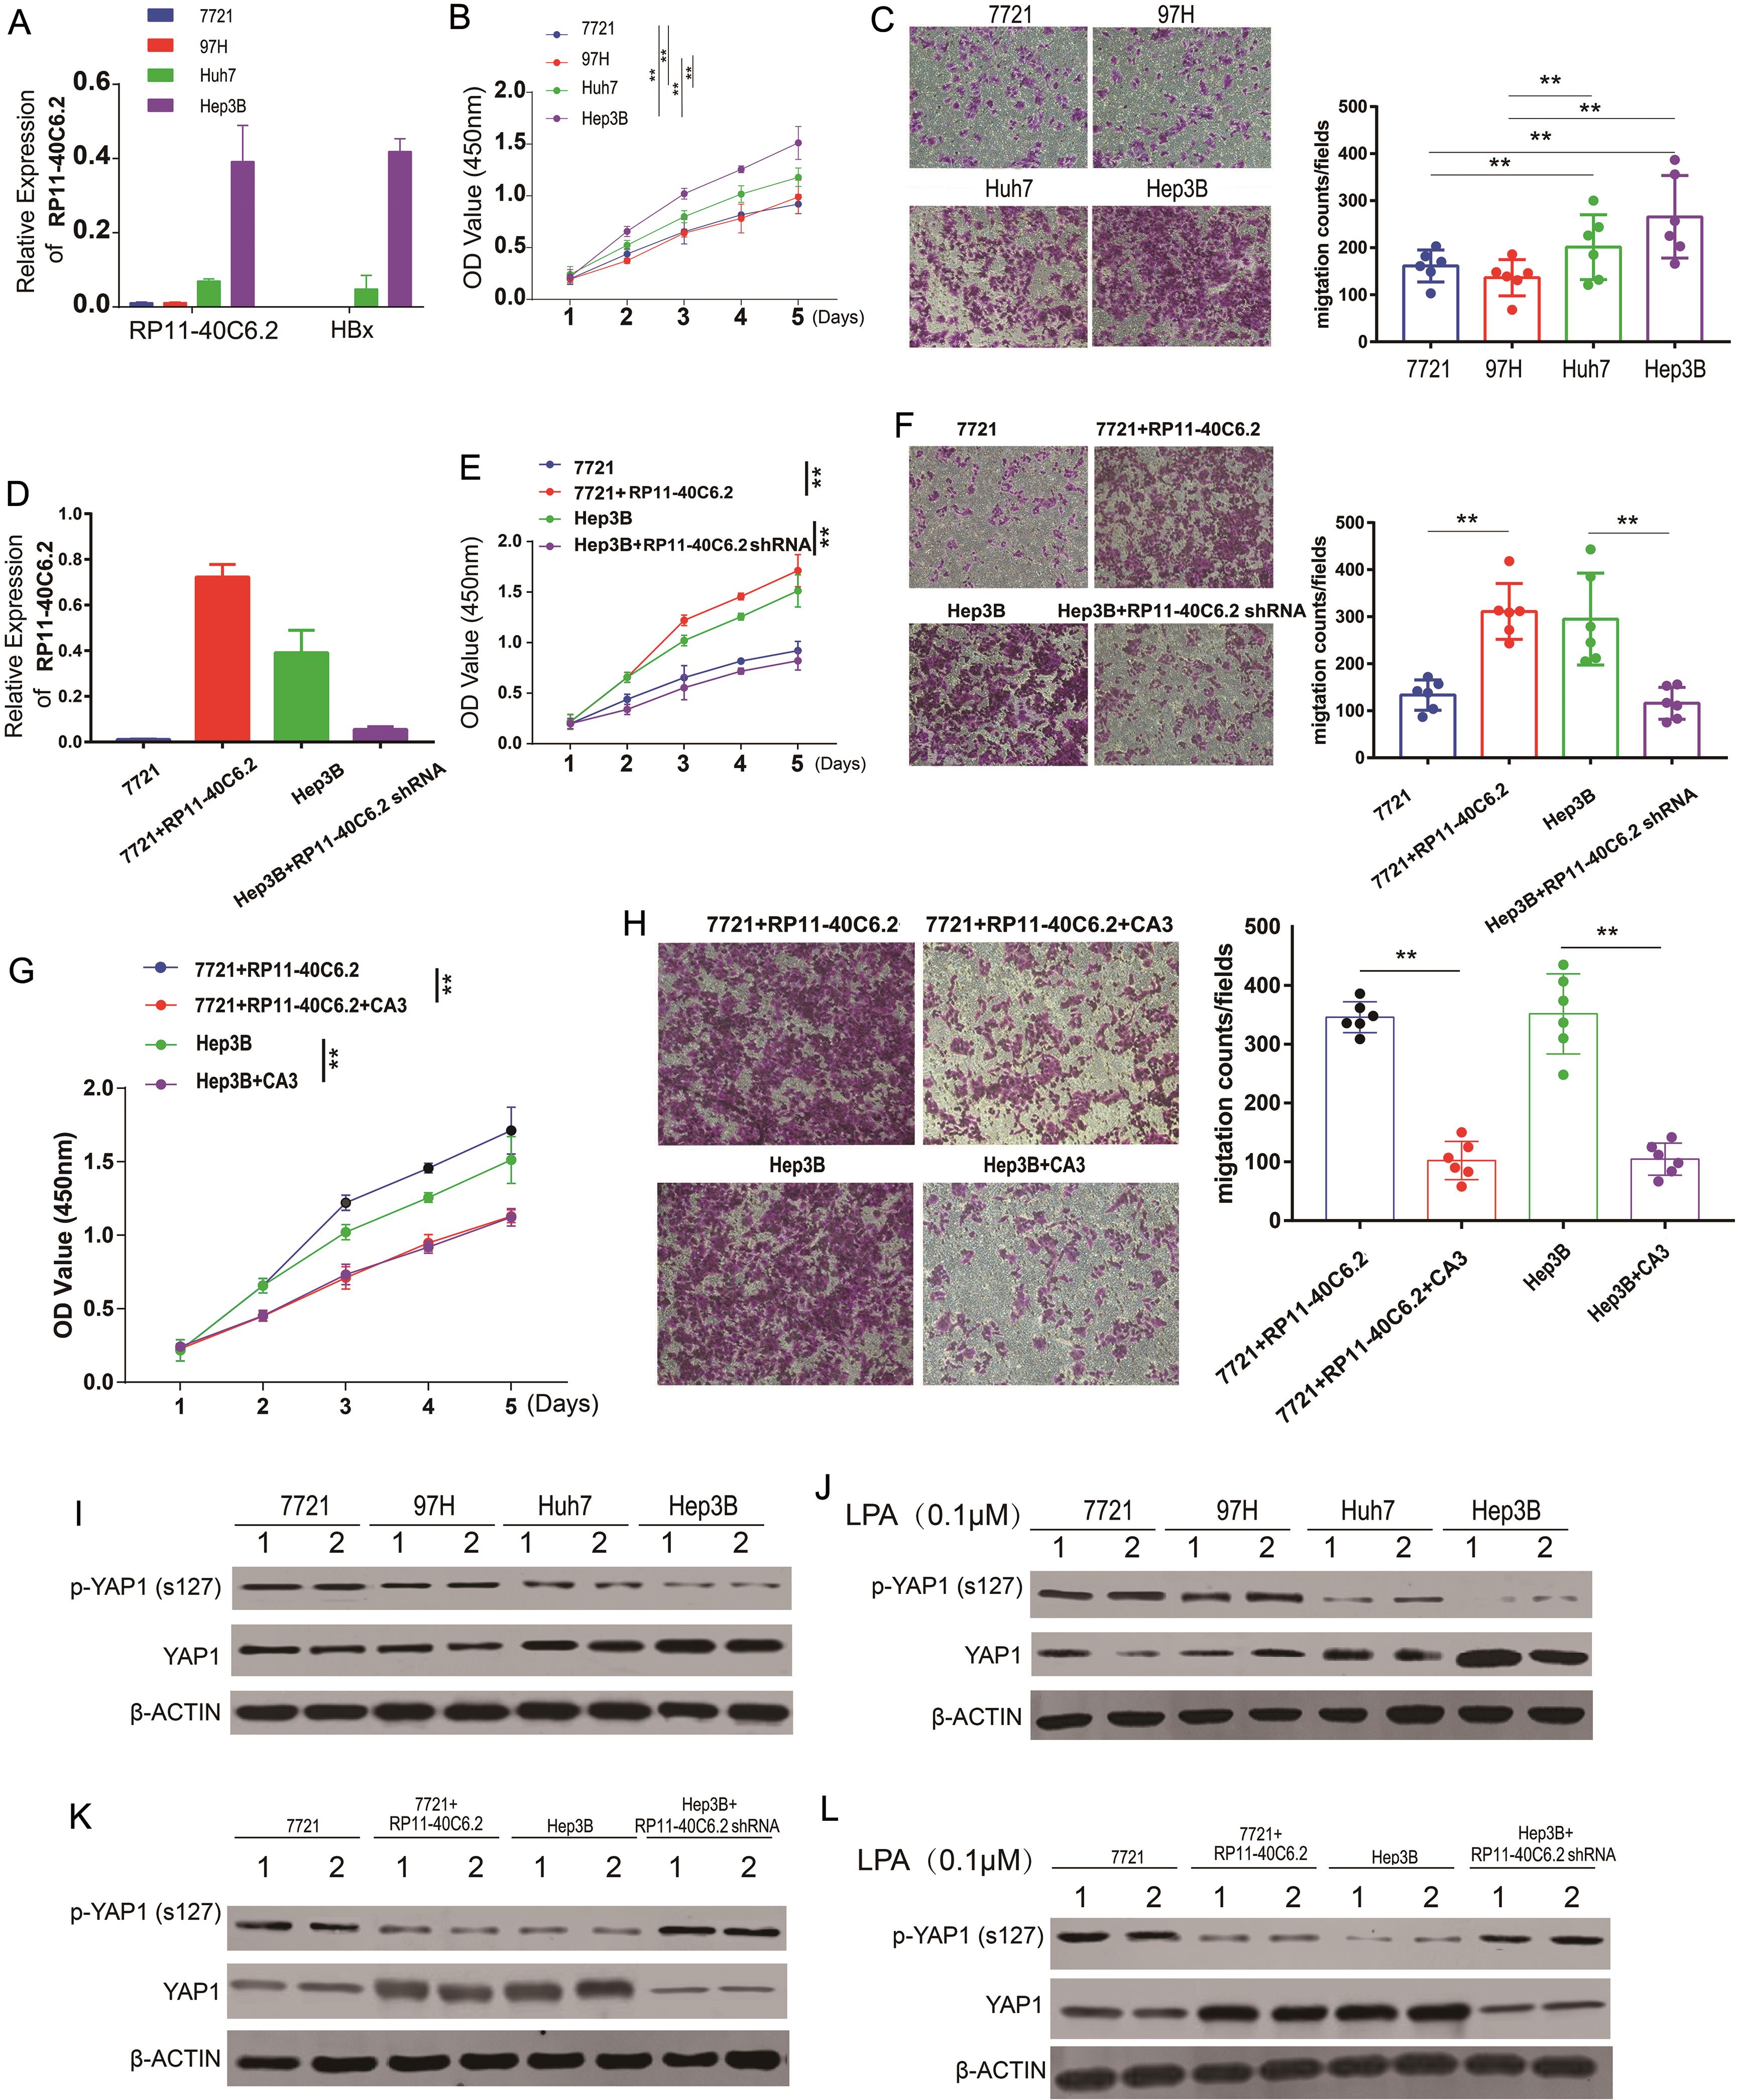 RP11-40C6.2 enhances the proliferation and invasiveness of HCC cells by YAP1 activation.